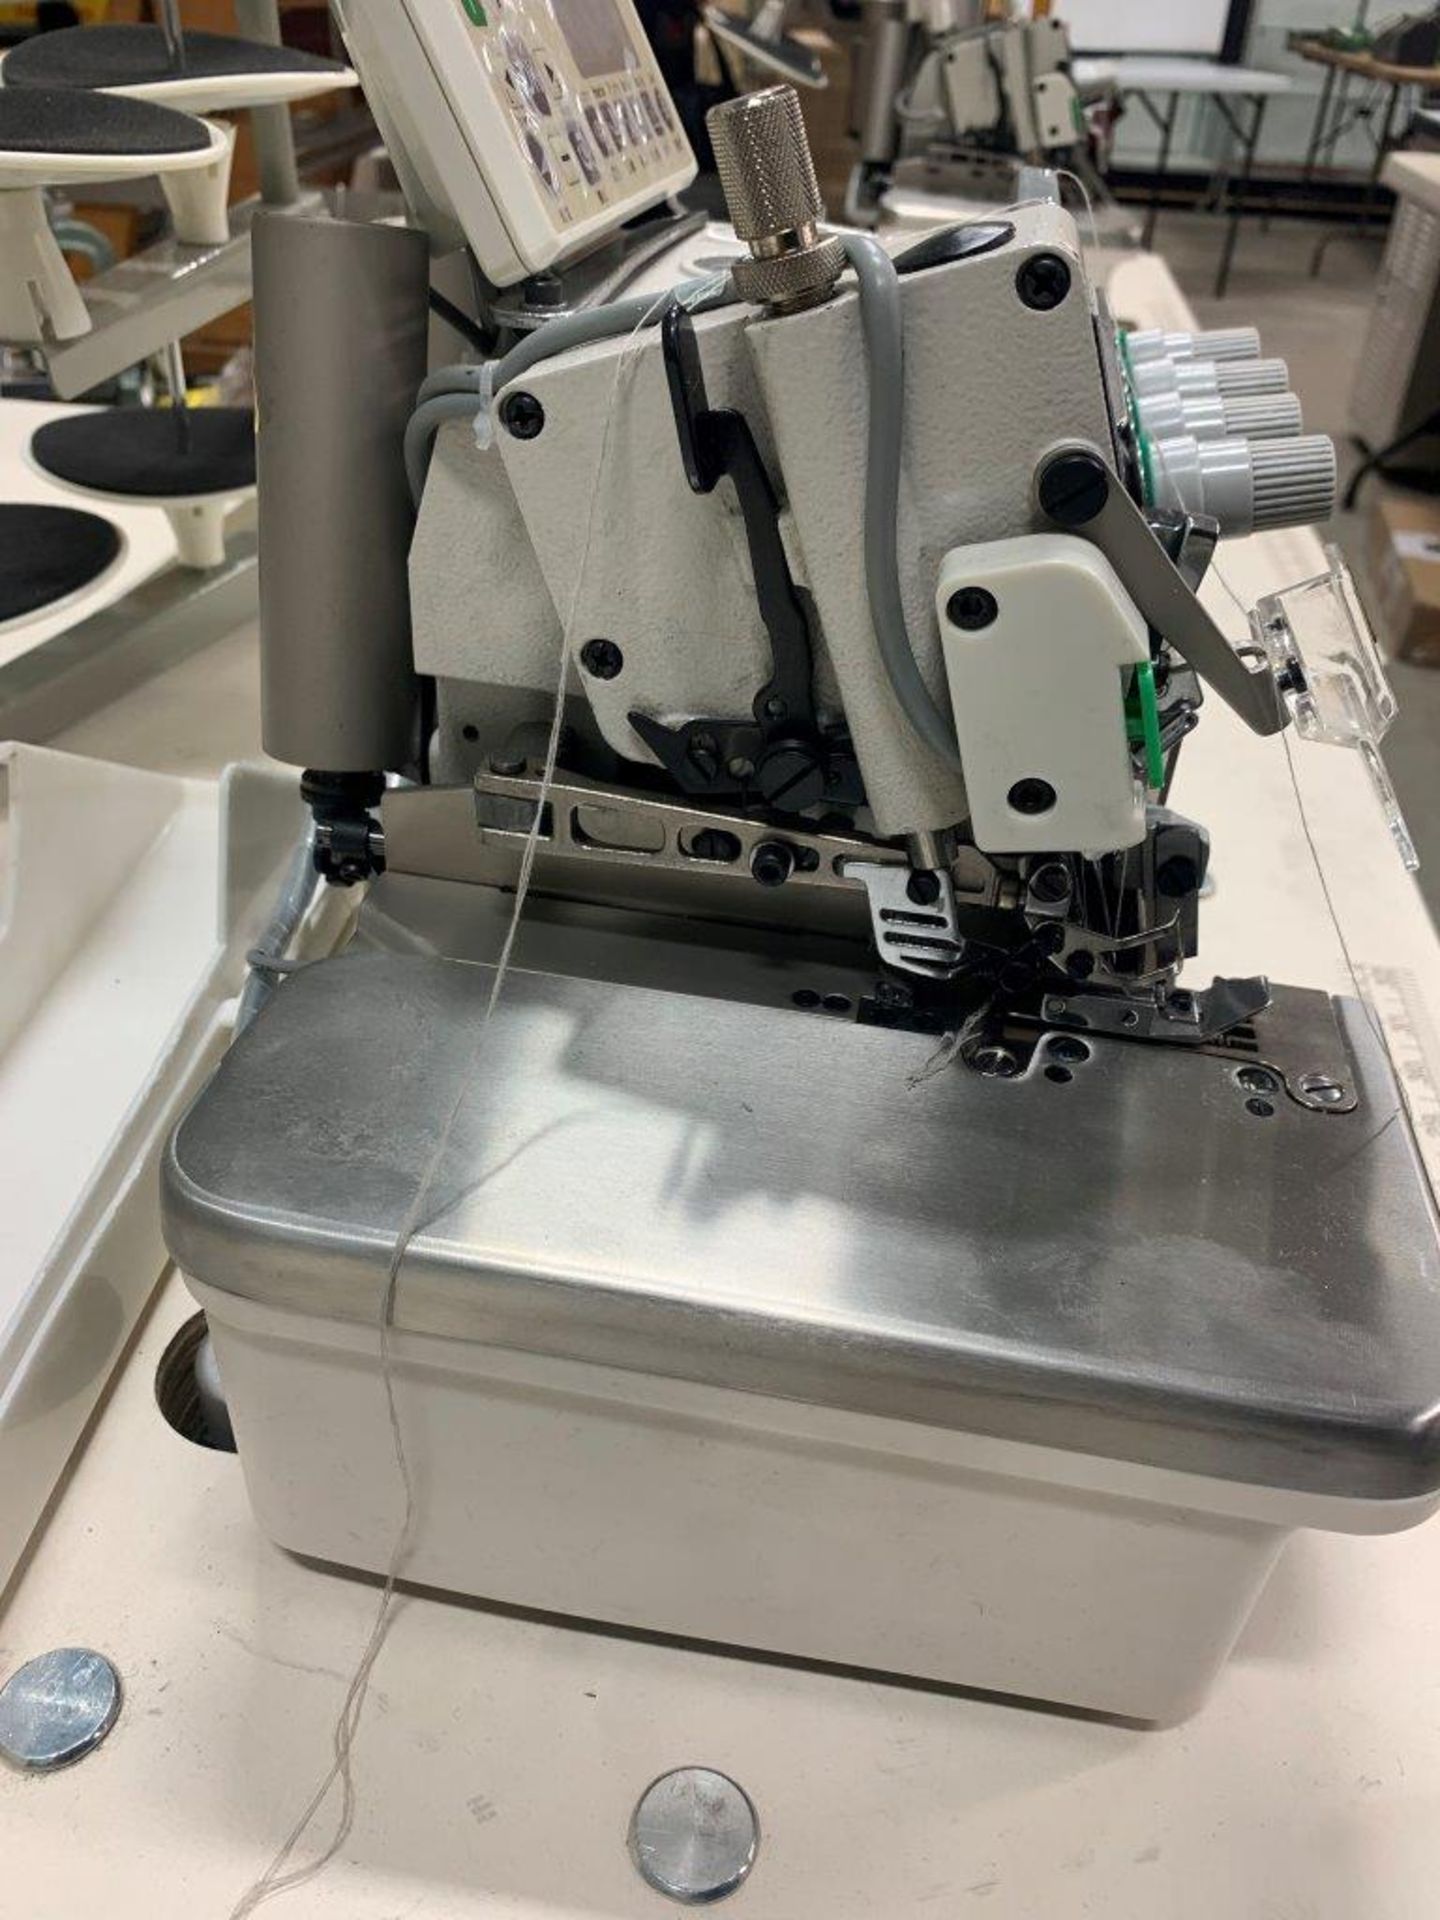 DOIT EX AUTOMATIC SEWING MACHINE W/ TABLE, FOOT PEDAL, MOTOR, S/N DT3216EX-02/233/KS/DD - DIGITAL - Image 6 of 8